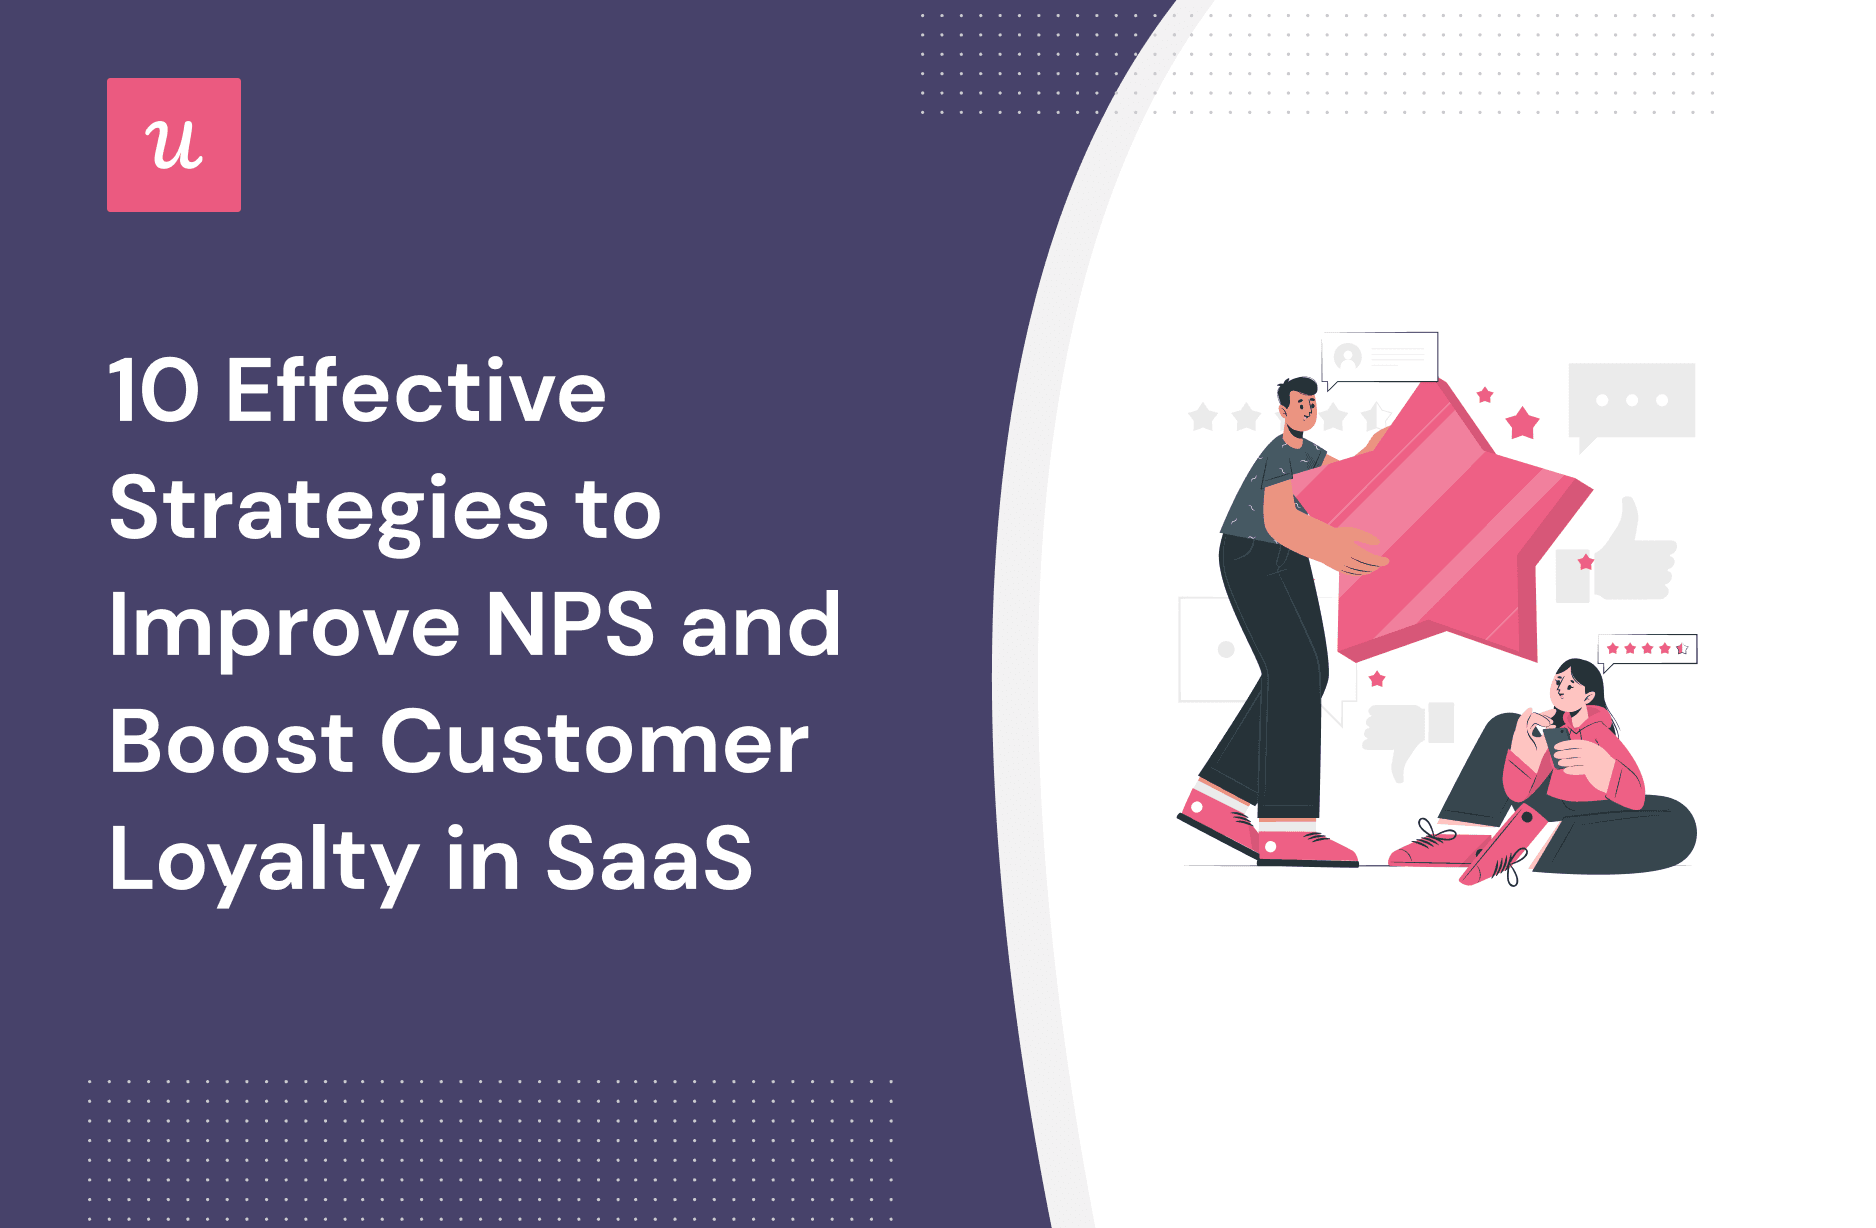 10 Effective Strategies To Improve NPS and Boost Customer Loyalty in SaaS cover